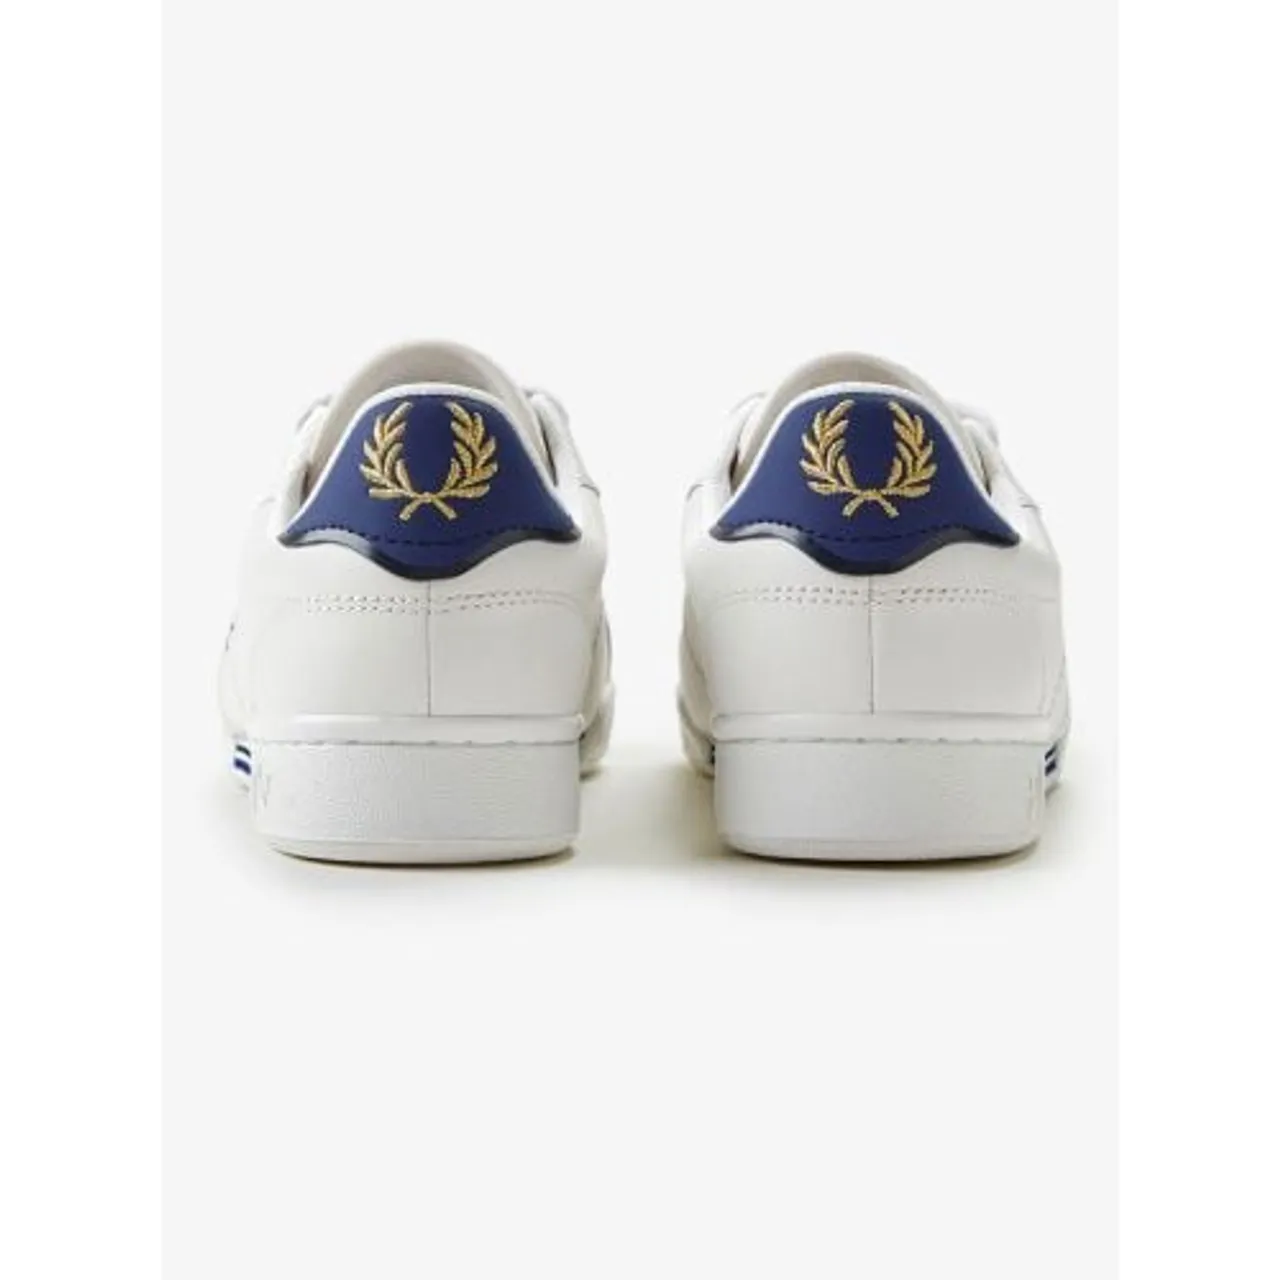 Fred Perry Mens Porcelain Shaded Cobalt B722 Leather Trainer